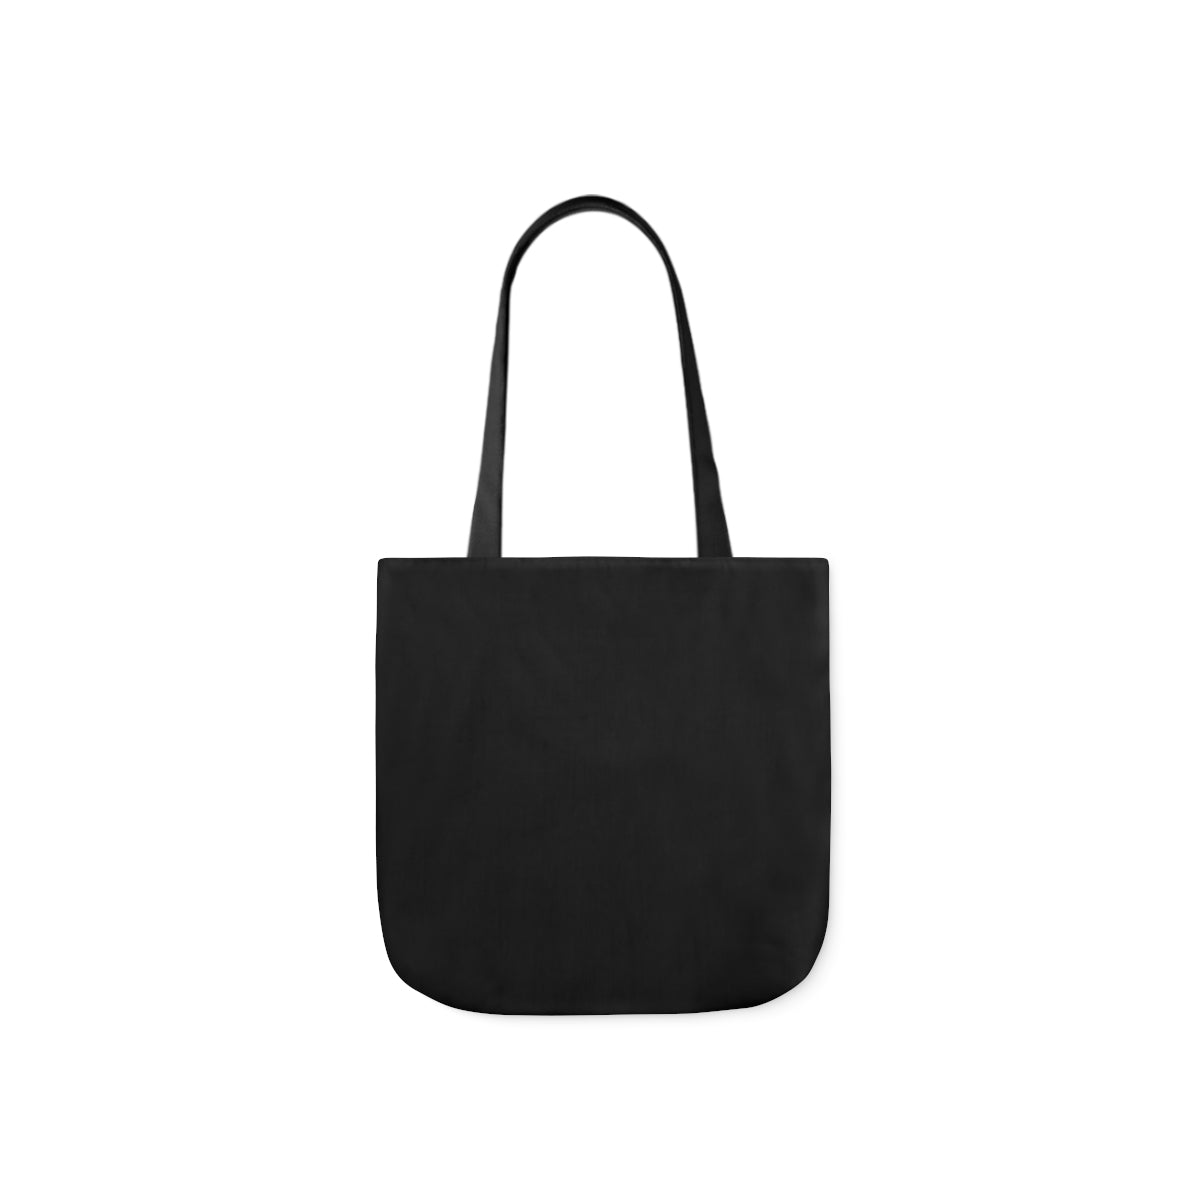 WNRM Loves You Polyester Canvas Tote Bag, back